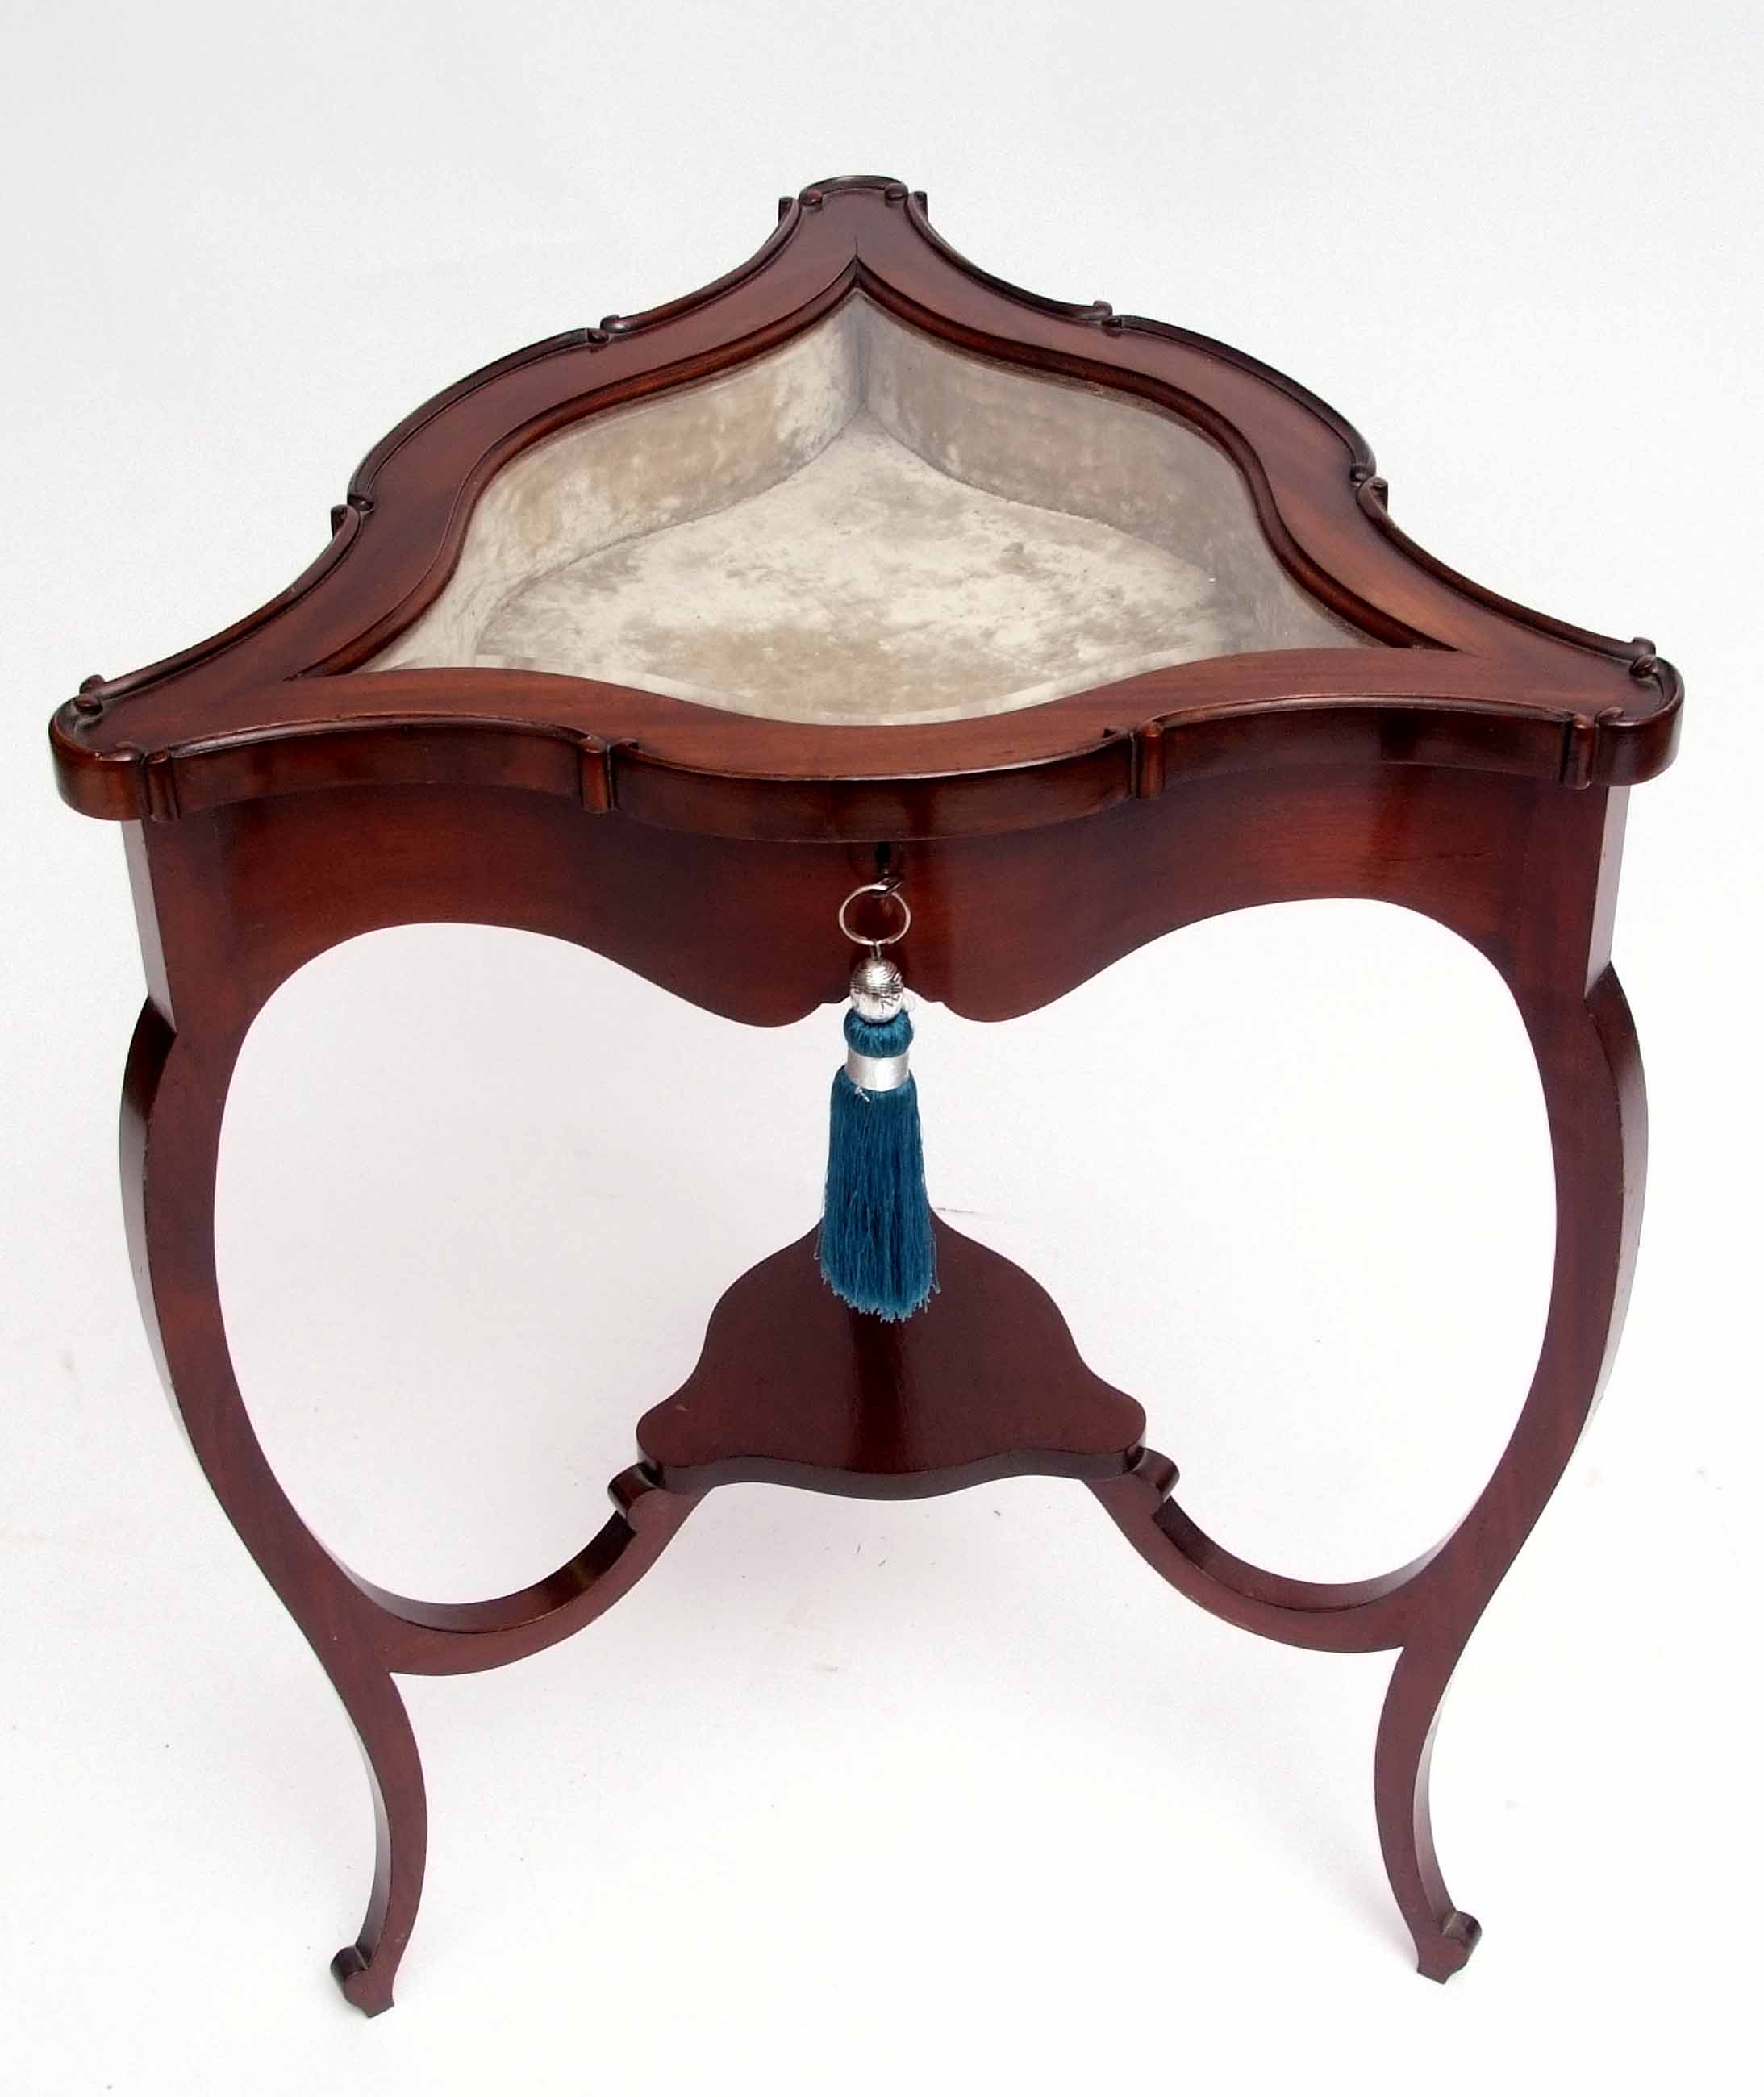 Mahogany bijouterie table of shaped triangular form, the lifting lid with central bevelled glass - Image 3 of 5